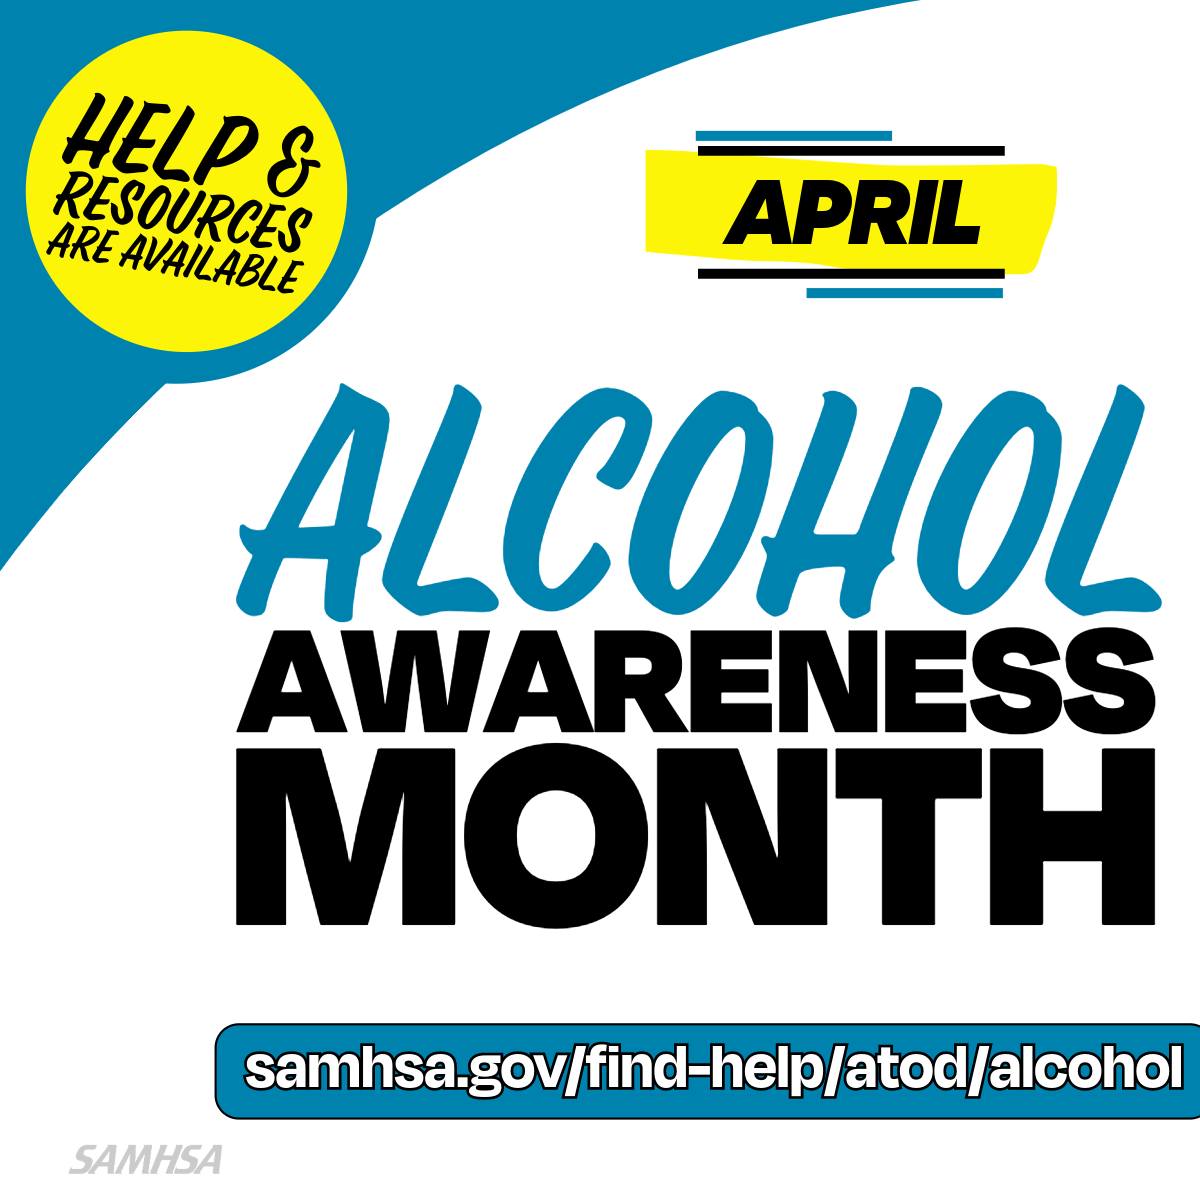 April is #AlcoholAwarenessMonth, a time to raise awareness of alcohol use and misuse. Check out SAMHSA's helpful resources for parents, caregivers, and teens on alcohol use and misuse prevention here: samhsa.gov/find-help/atod….